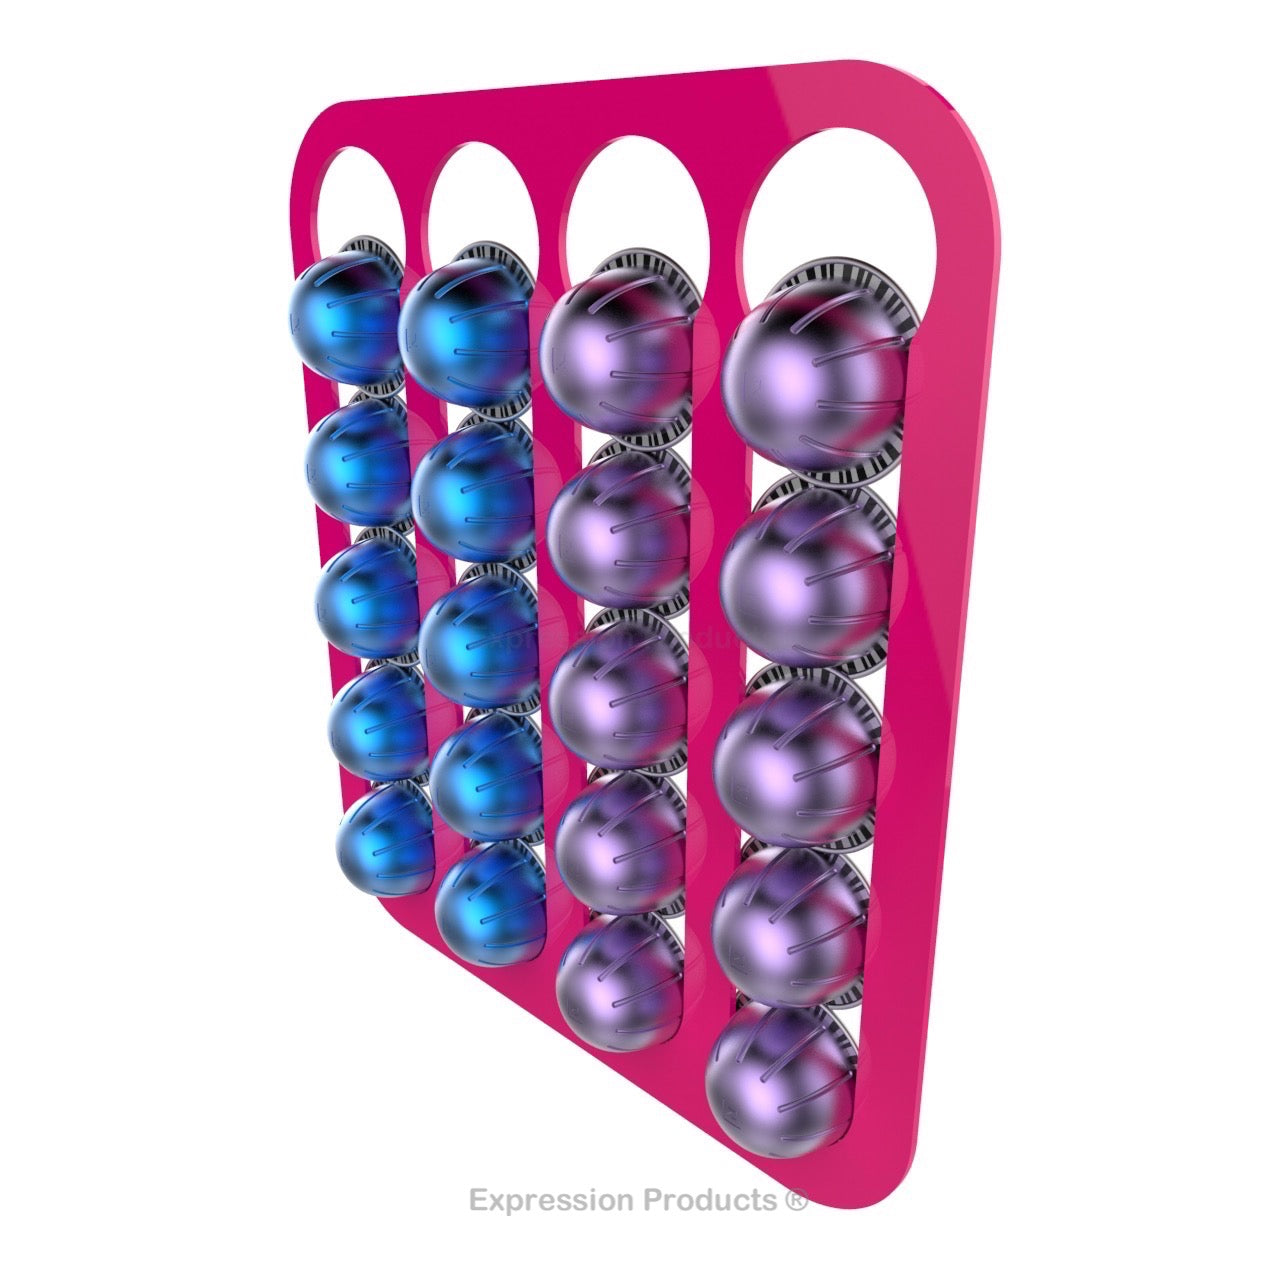 Magnetic Nespresso Vertuo capsule holder shown in pink holding 20 pods